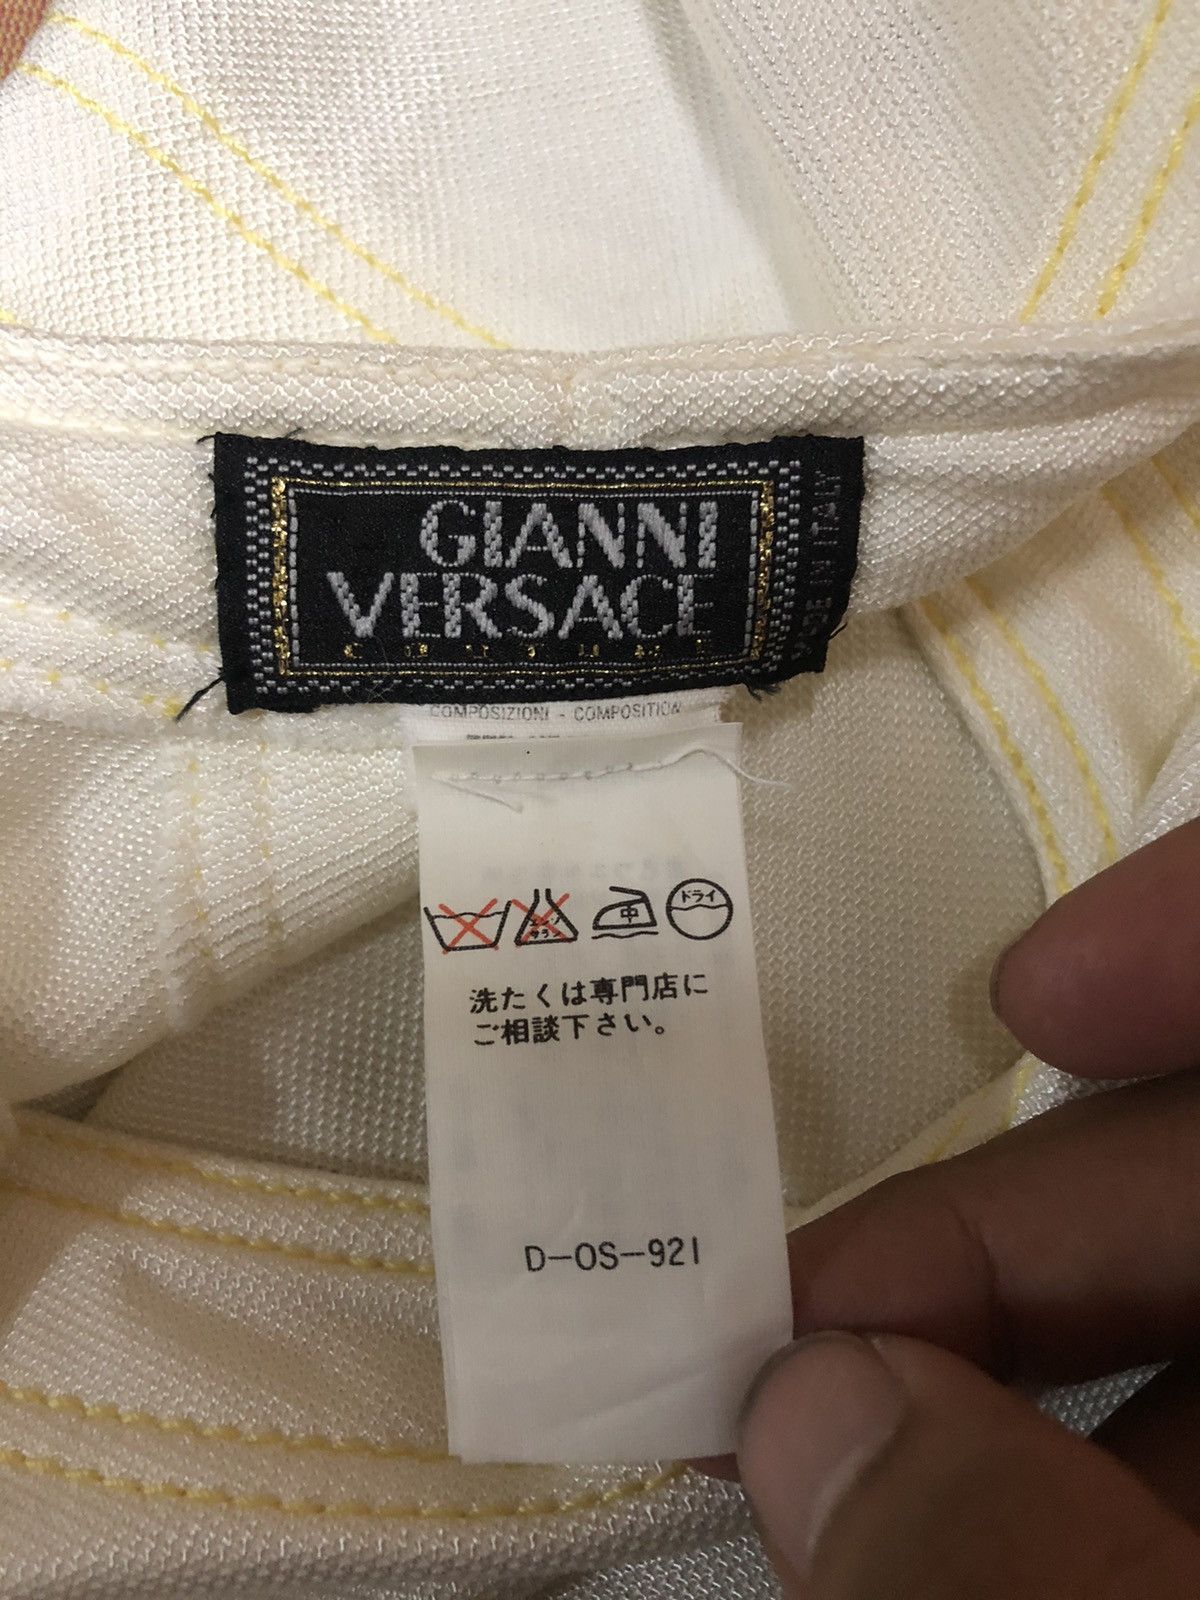 Vintage - Gianni Versace Long Stretch Made Italy - 8